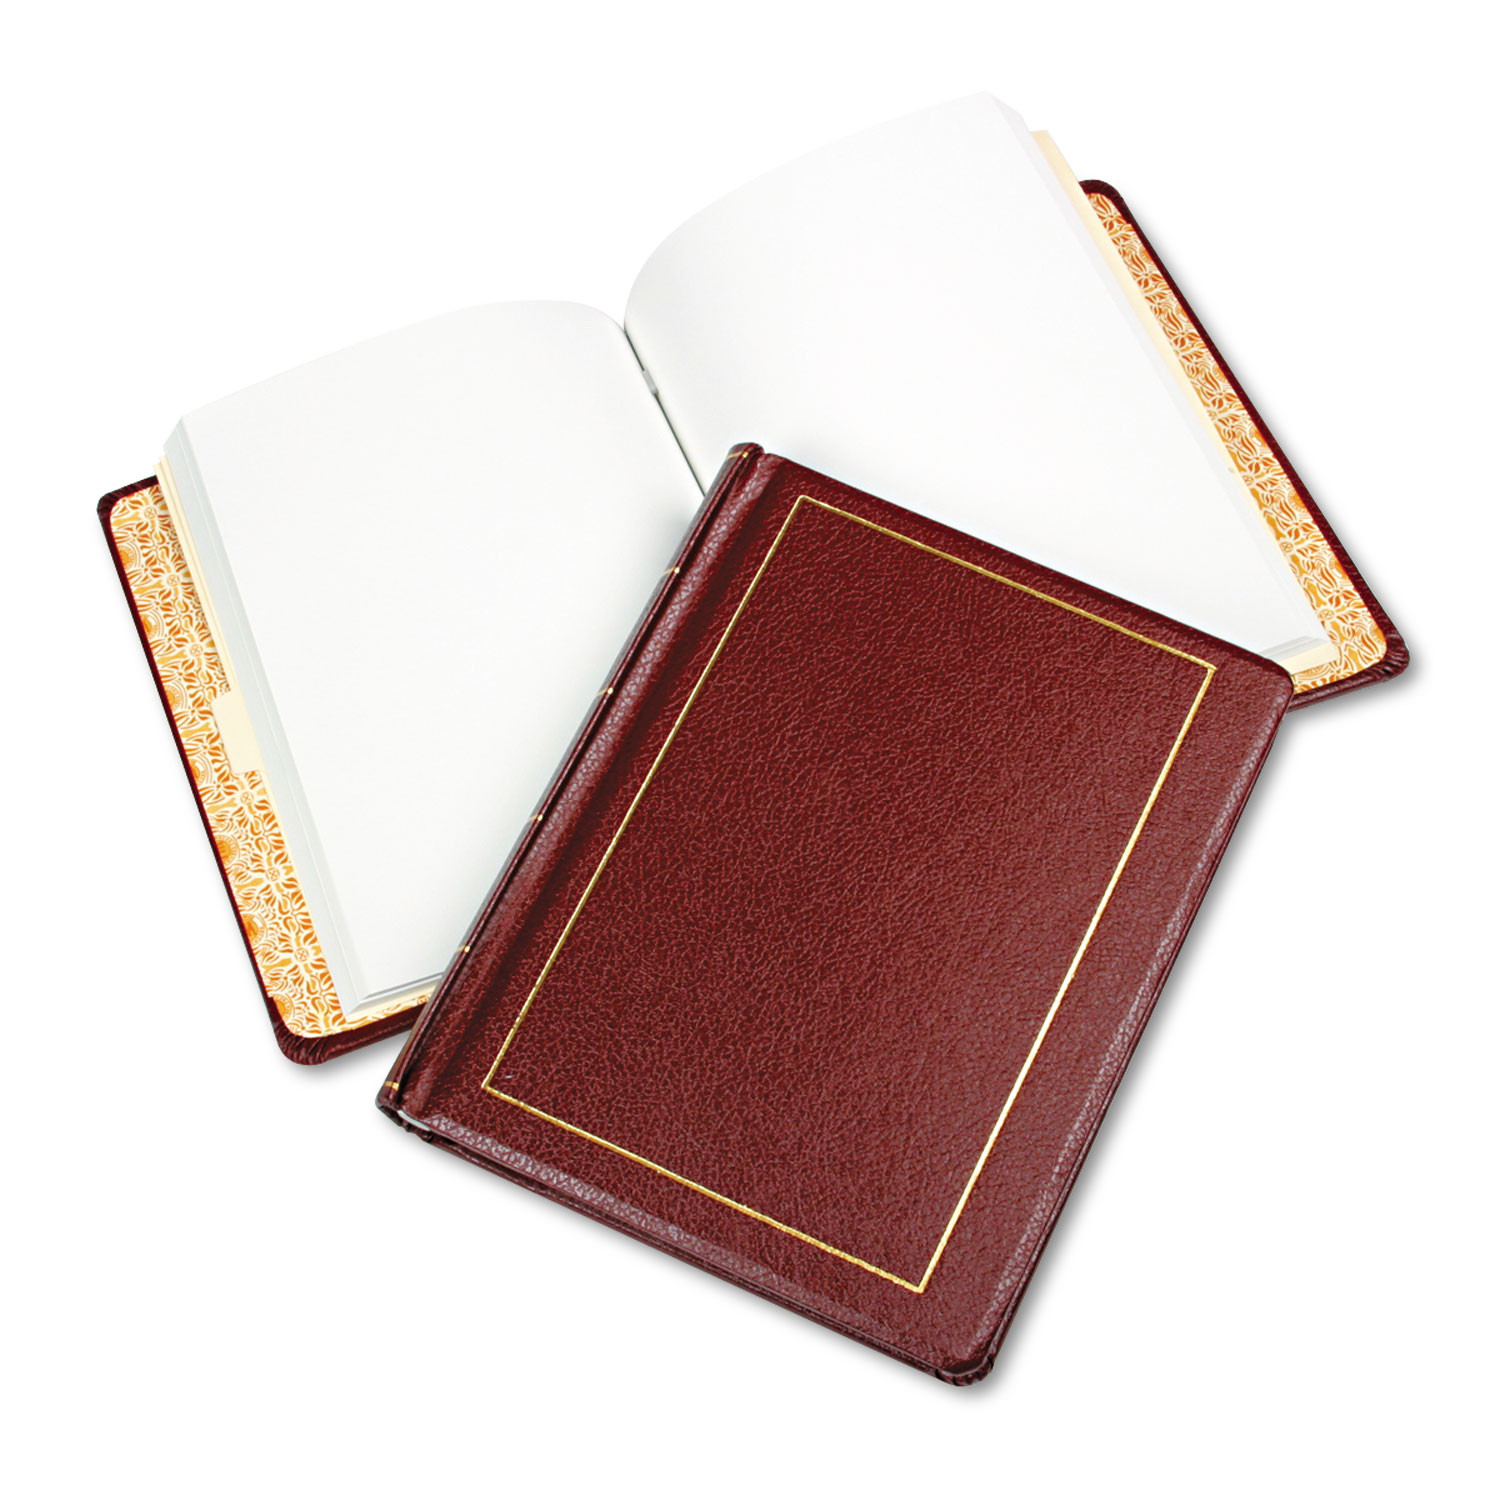  Wilson Jones W0396-11 Looseleaf Minute Book, Red Leather-Like Cover, 250 Unruled Pages, 8 1/2 x 11 (WLJ039611) 